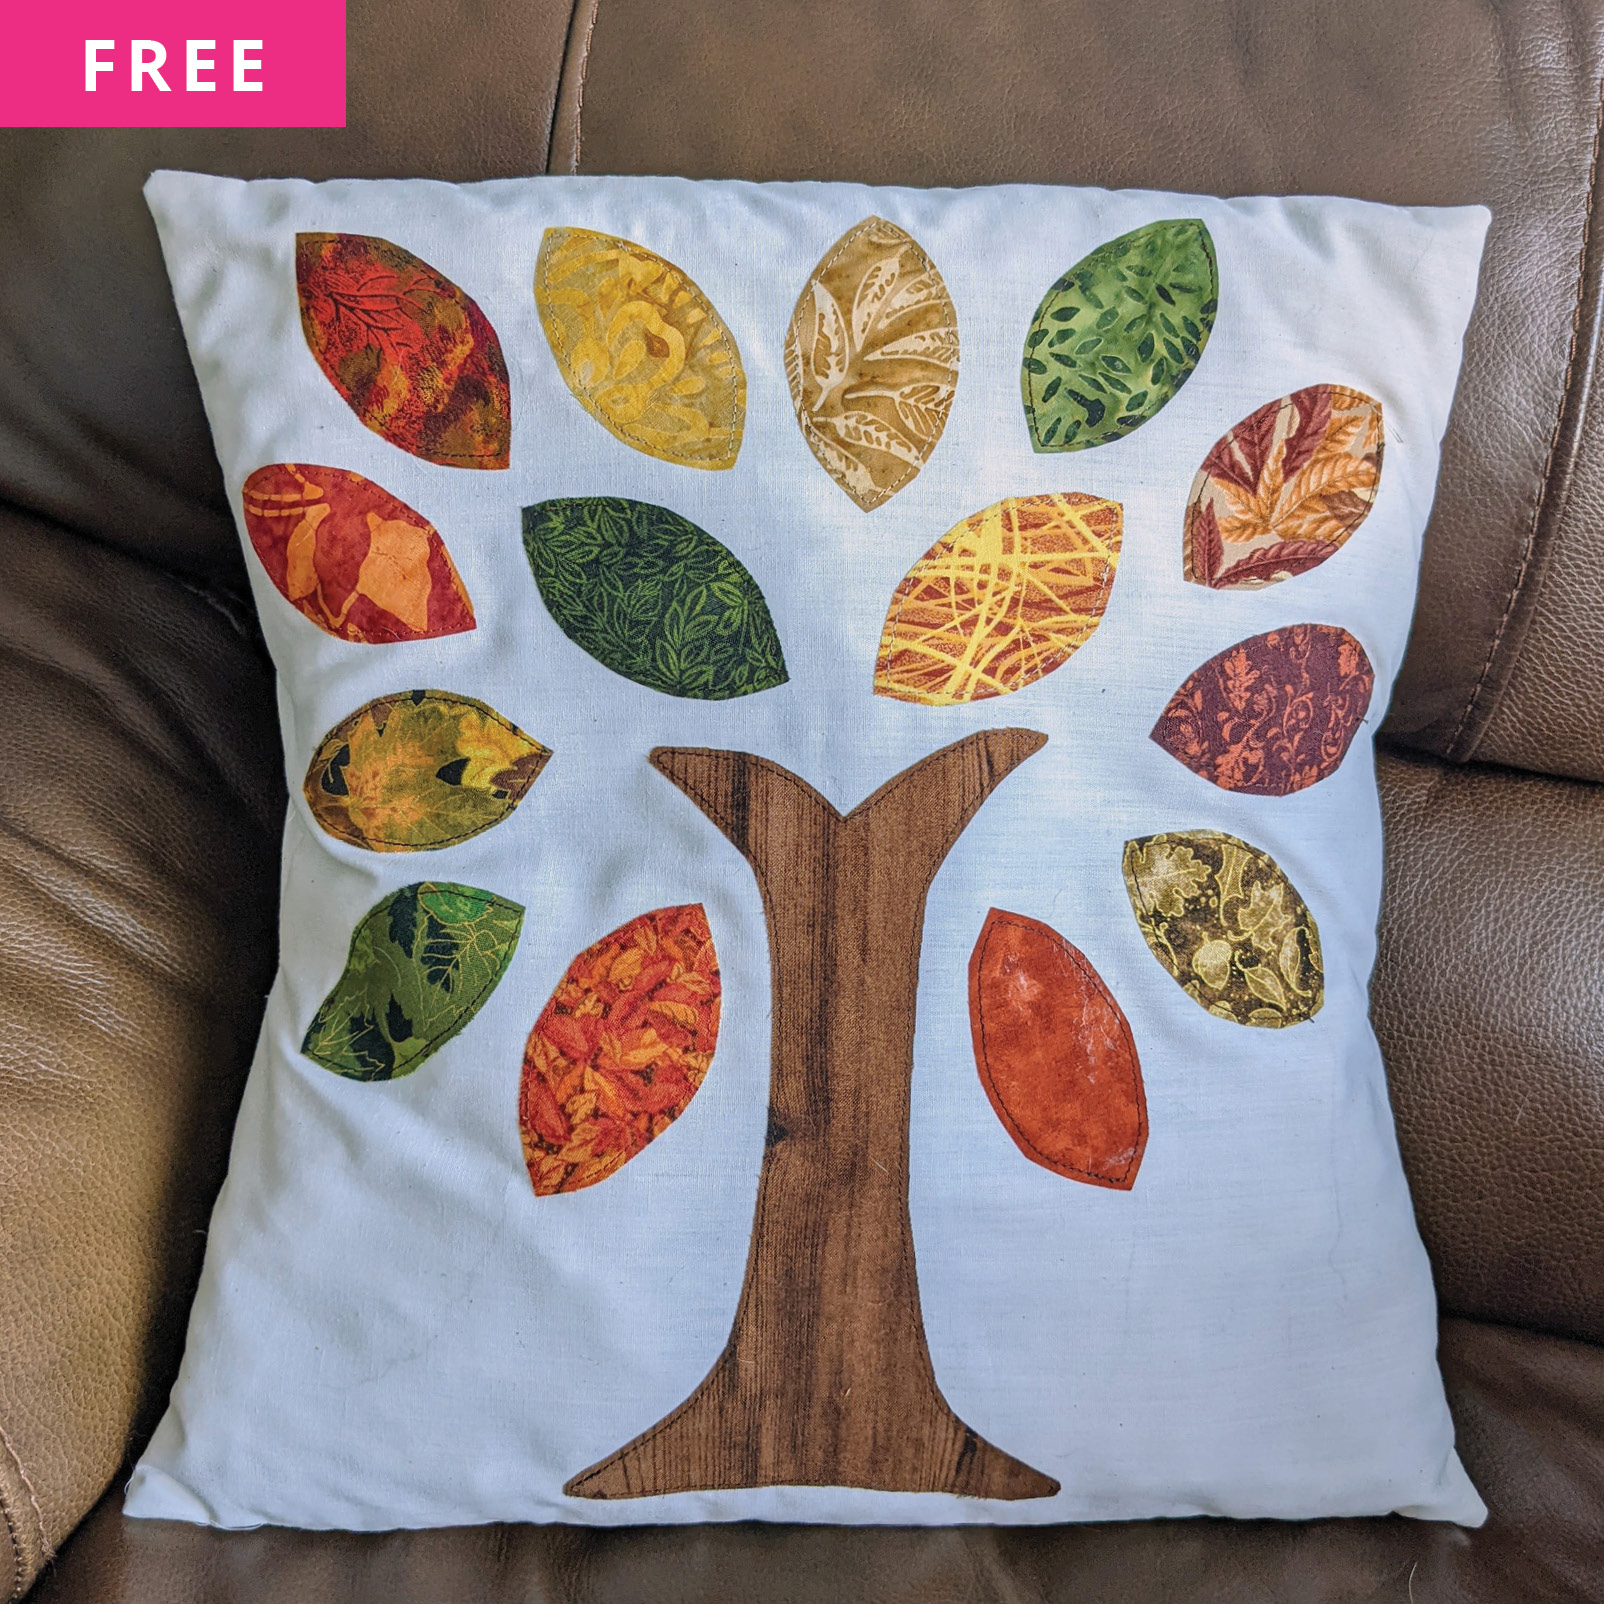 Free Sewing Pattern - Applique Leaves Pillow